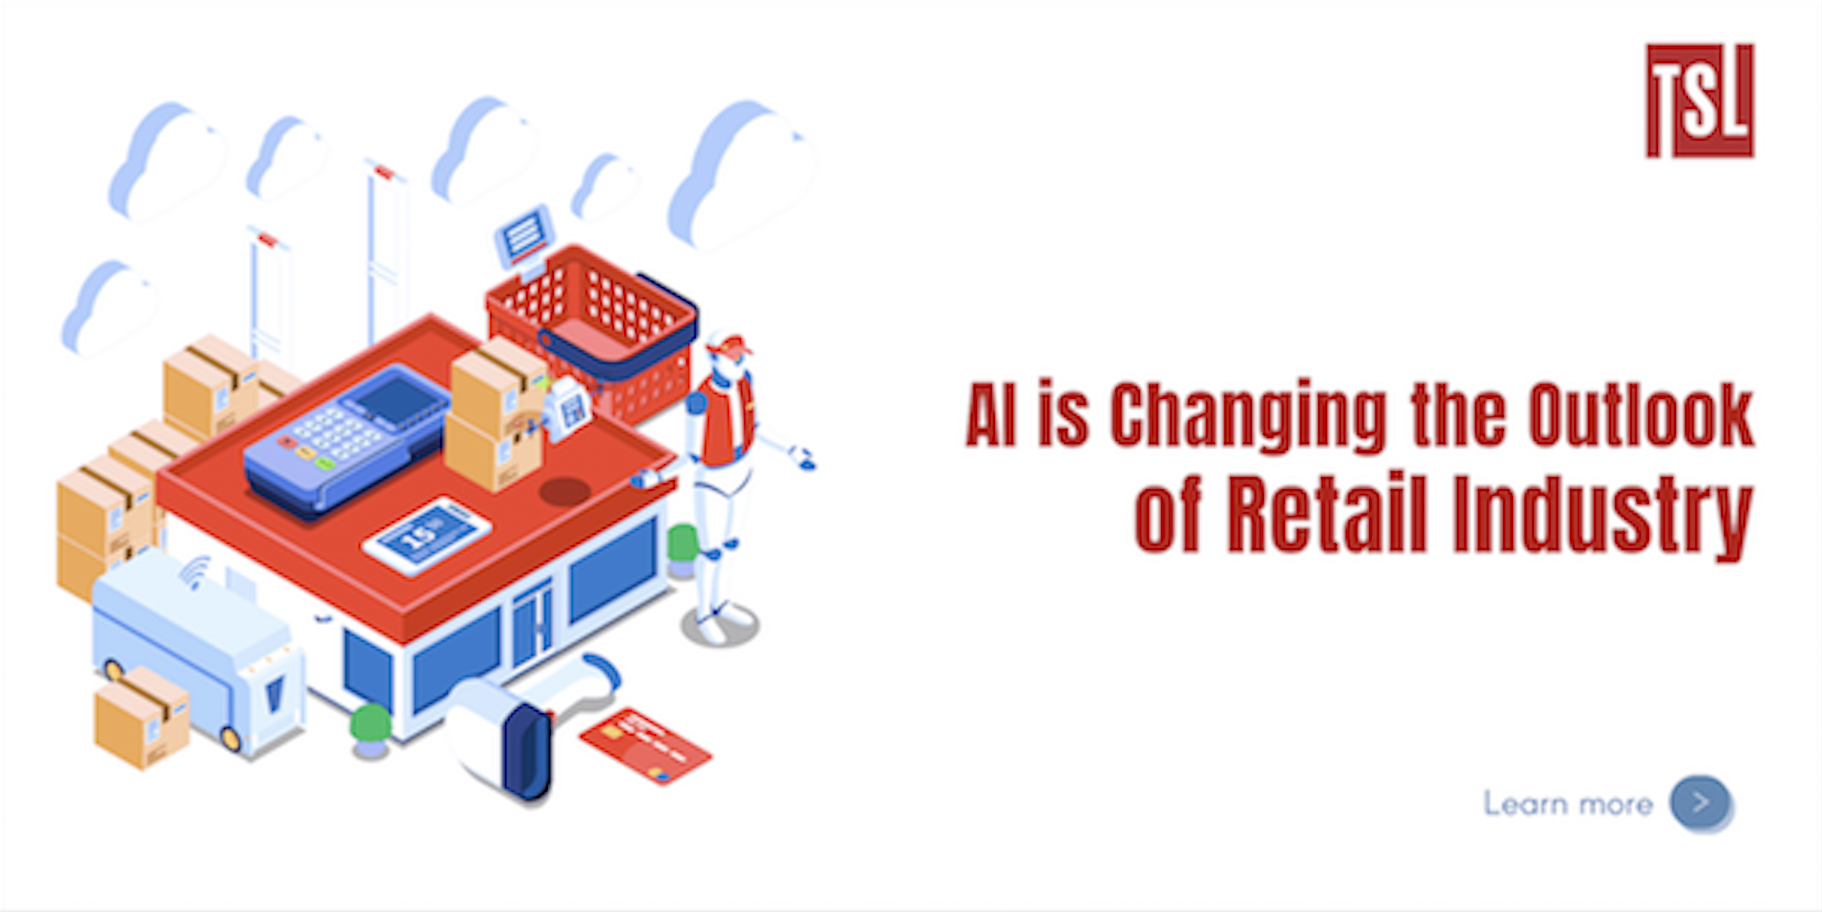 AI is Changing the Outlook of Retail Industry